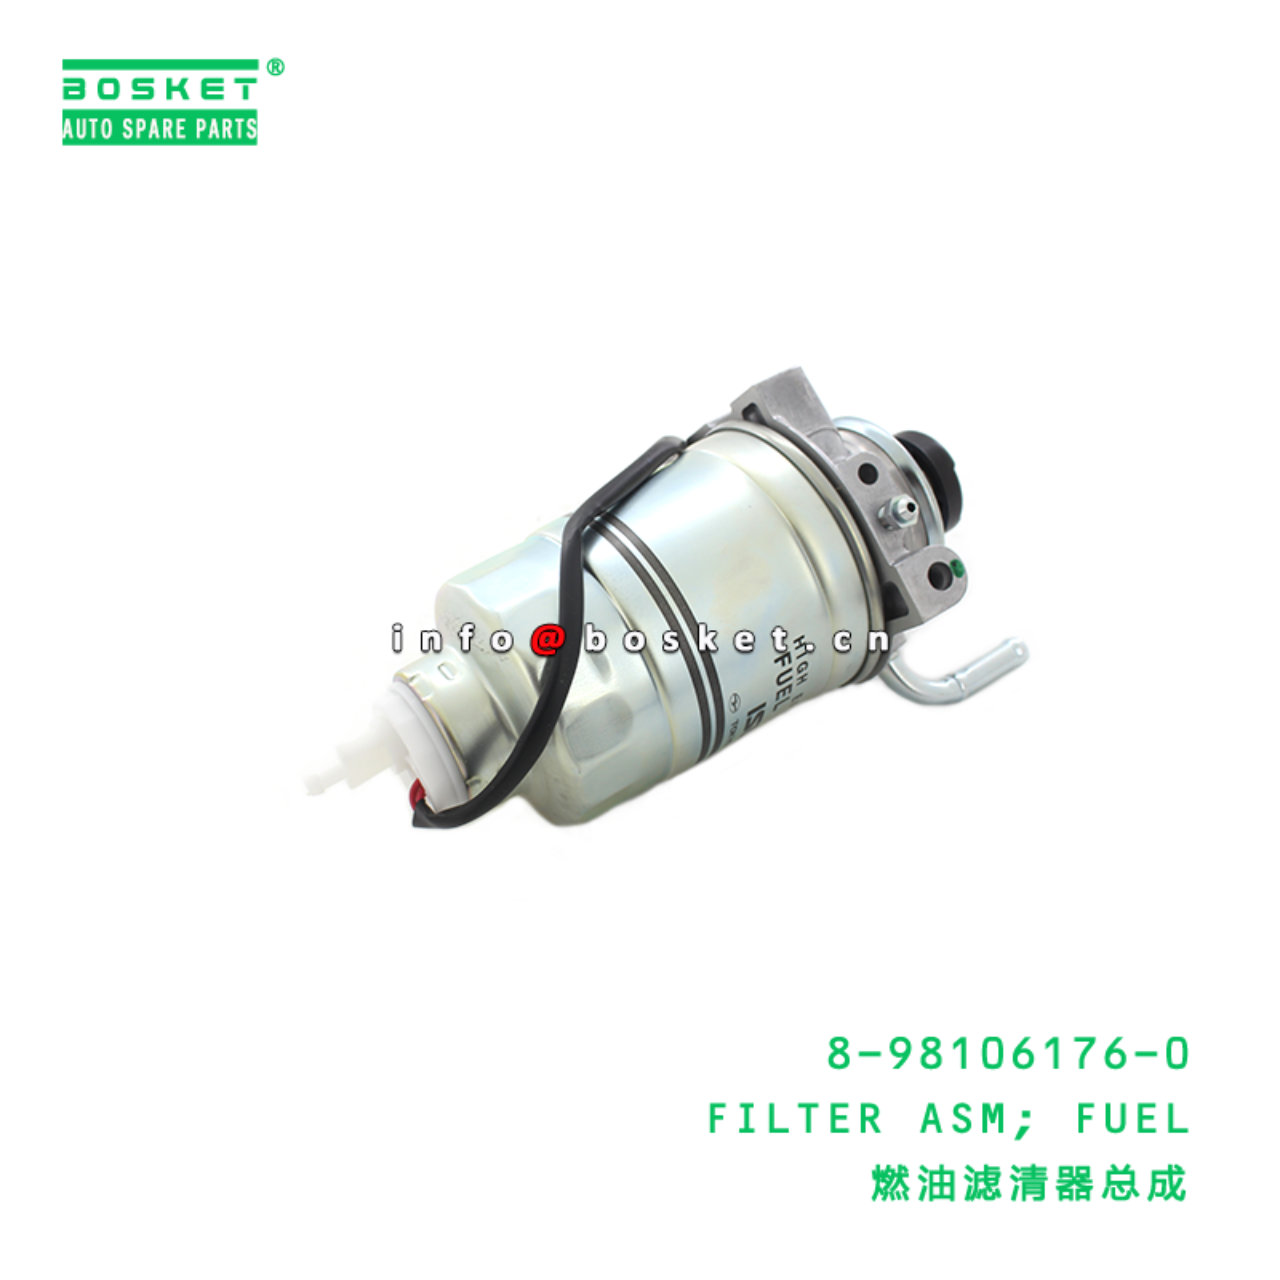 8-98106176-0 Fuel Filter Assembly 8981061760 Suitable for ISUZU NMR